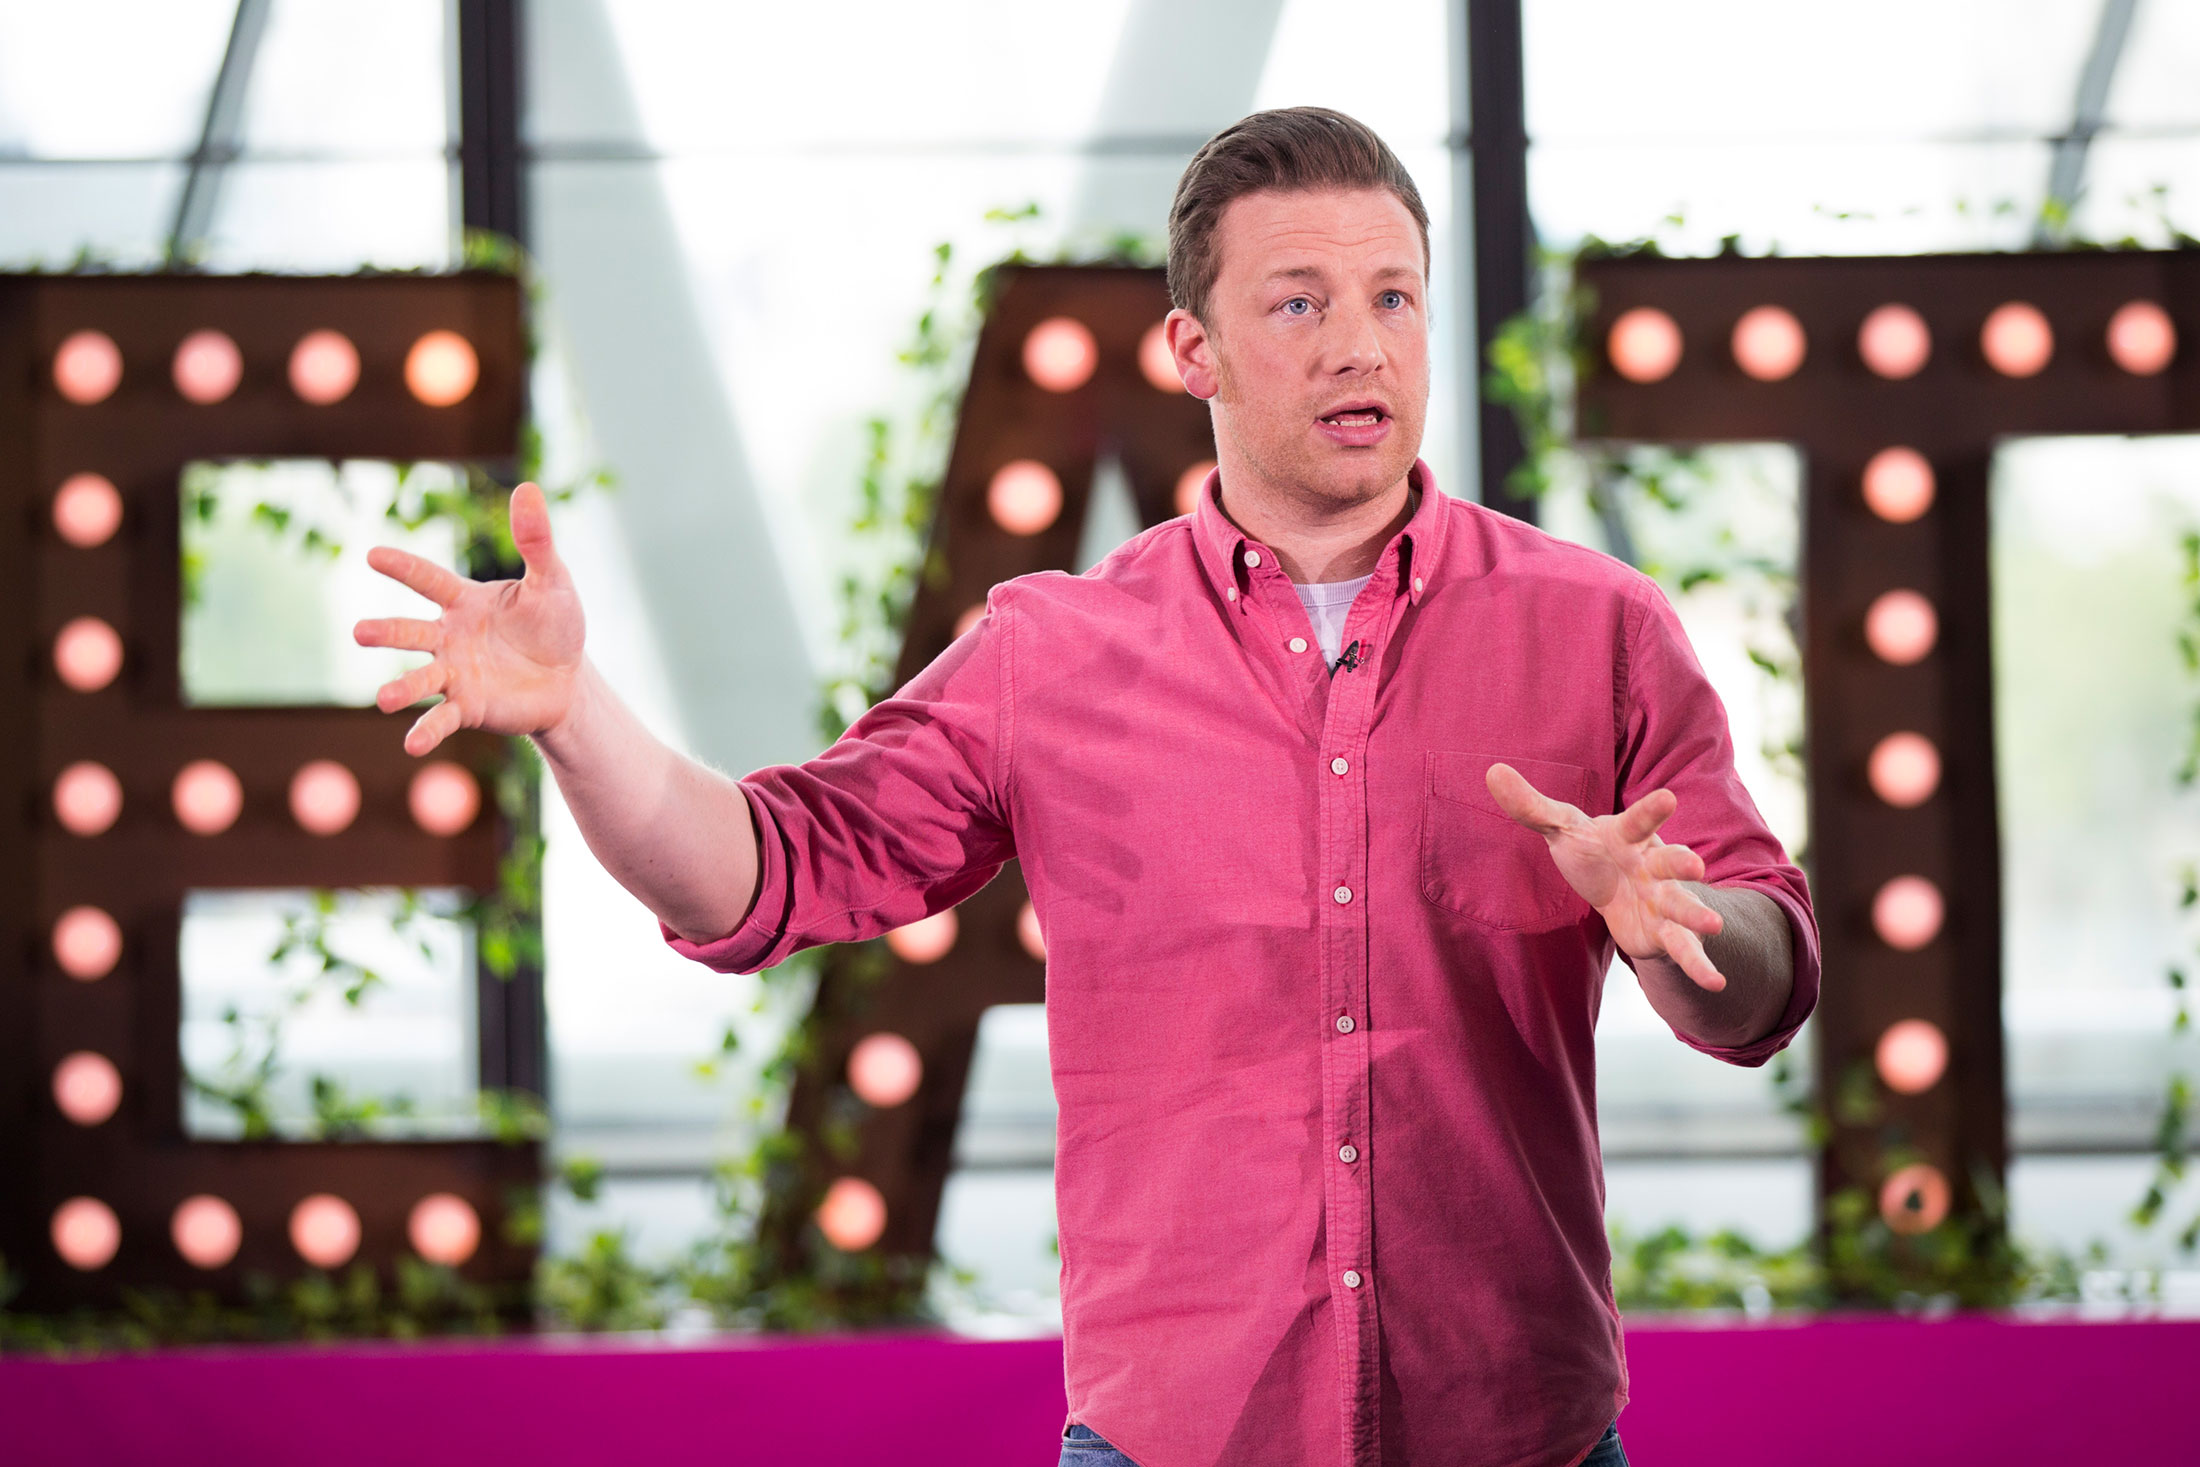 Jamie Oliver's daily diet revealed: what the celebrity chef eats